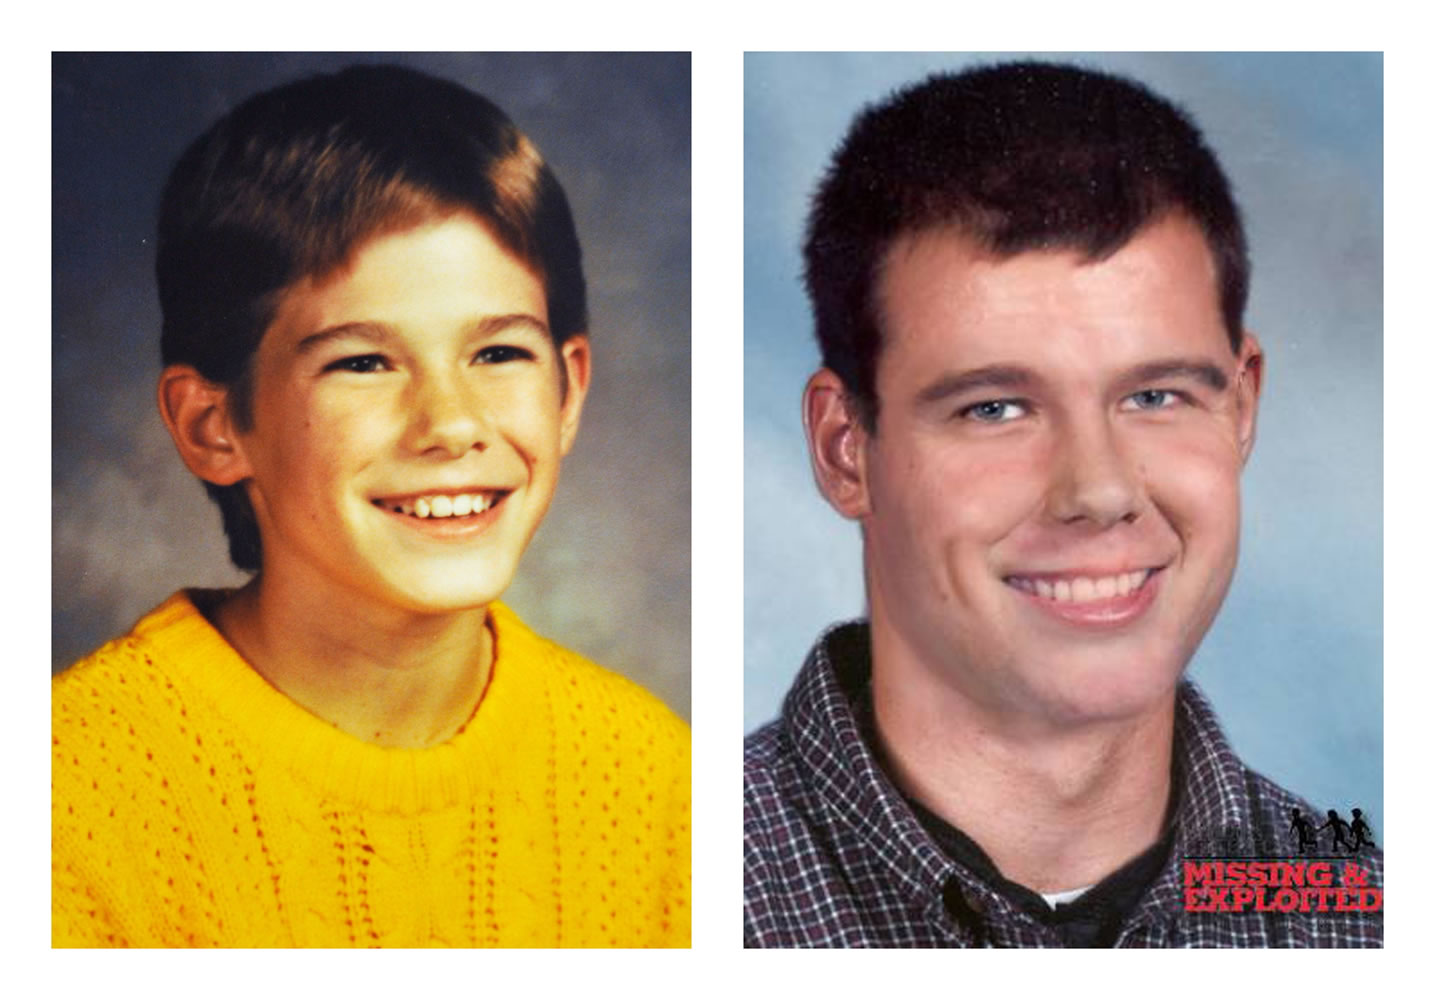 Jacob Wetterling, left, as he looked when he was abducted in 1989 at age 11, and at right, as a digital artist speculates he might look today.